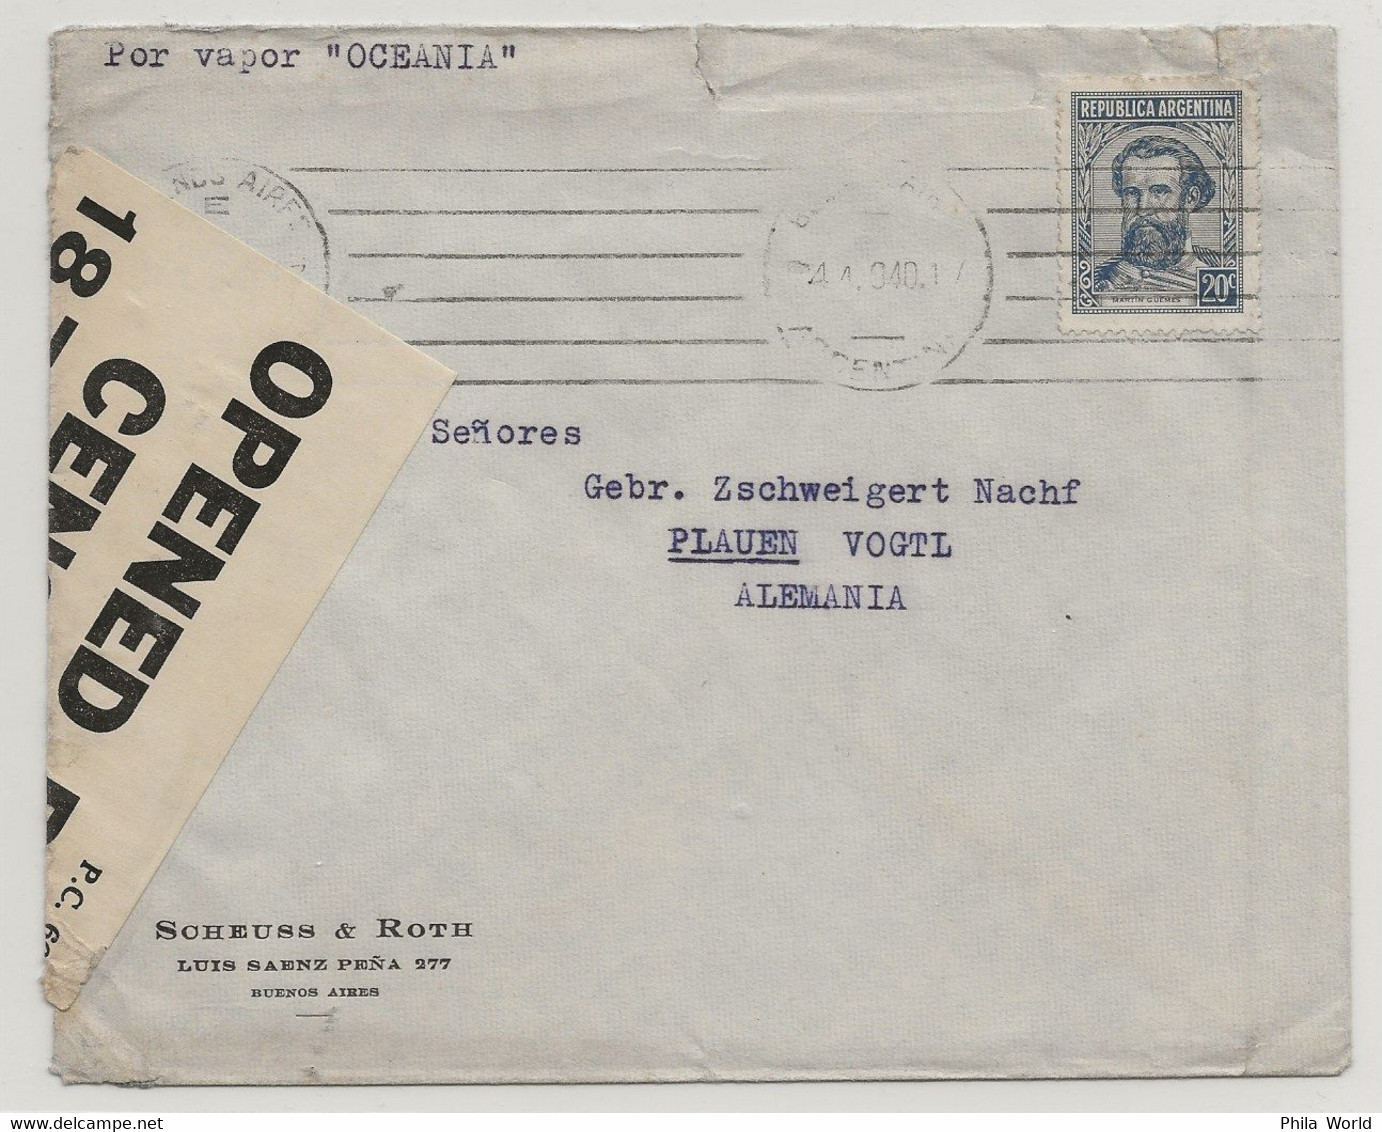 WW2 1940 ARGENTINA Por Vapor OCEANIA Maritime Mail Cover British Censorship 1878 And German Censored To GERMANY - WW2 (II Guerra Mundial)